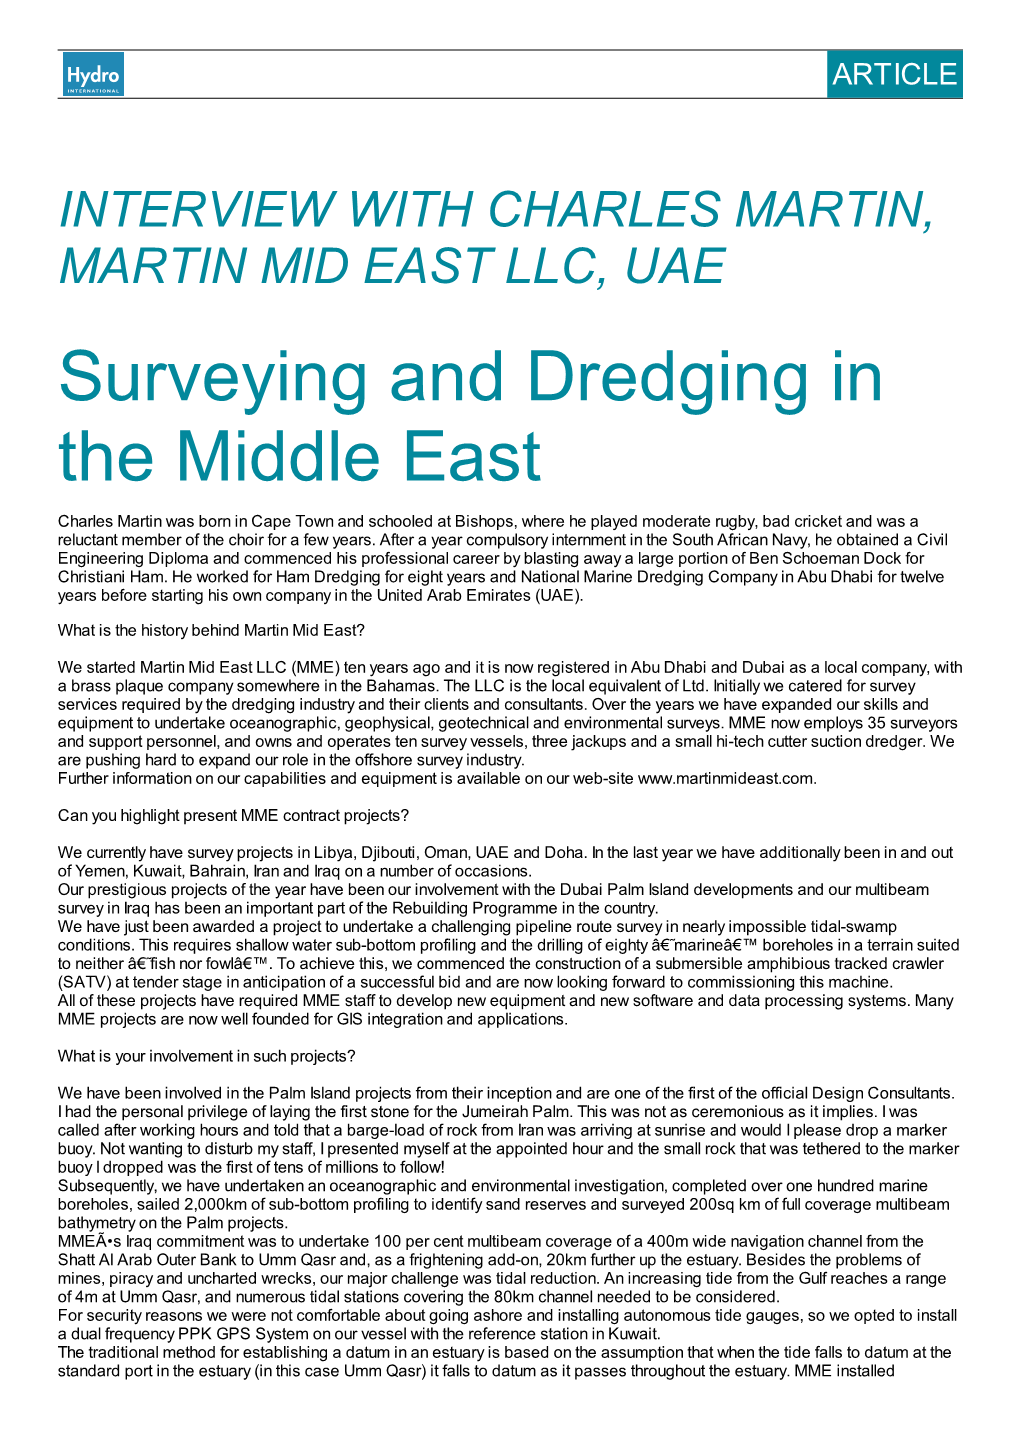 Surveying and Dredging in the Middle East